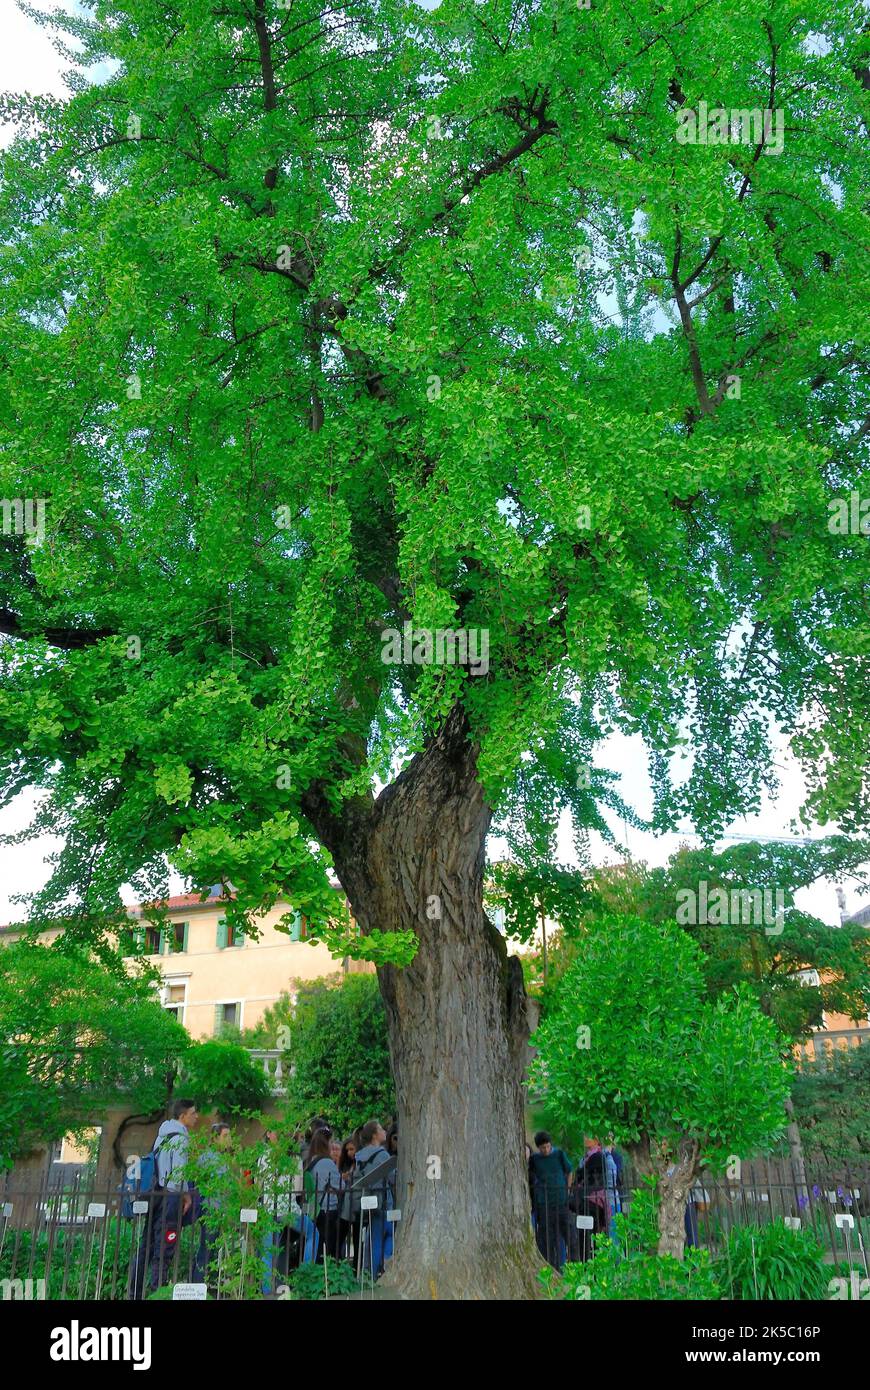 The University of Padua Botanical Garden. The Botanical Garden of the University of Padua was established in 1545 for the cultivation of medicinal plants. Schoolchildren visiting the botanical garden.Ginkgo biloba, this ginkgo is male and female as a result of grafting. Stock Photo